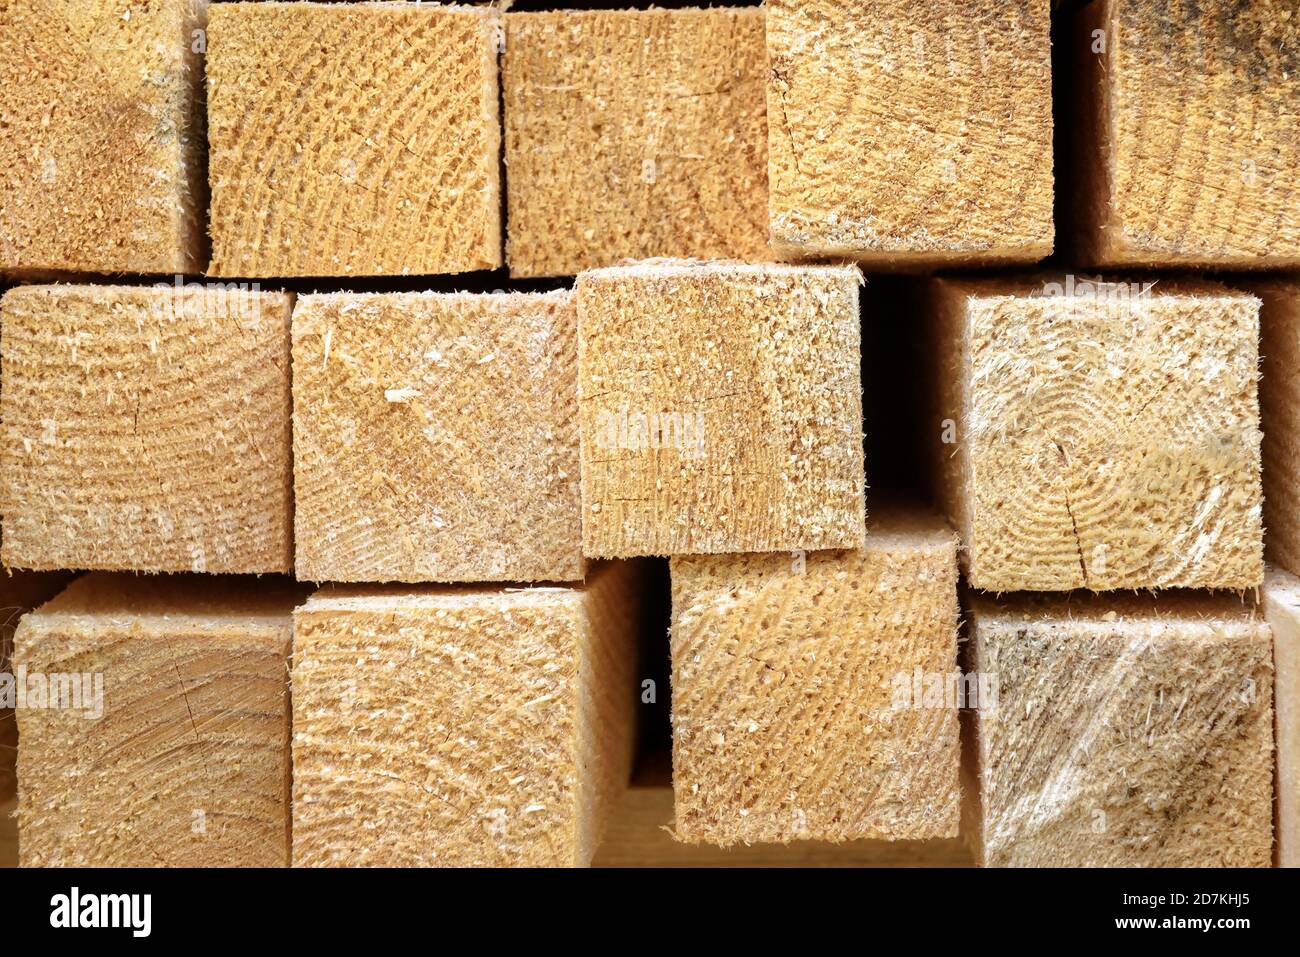 Lumber in sawmill, ends of timber blocks for texture background. Sawed and processed wood in storage, lumber stack in factory yard. Pile of wooden boa Stock Photo